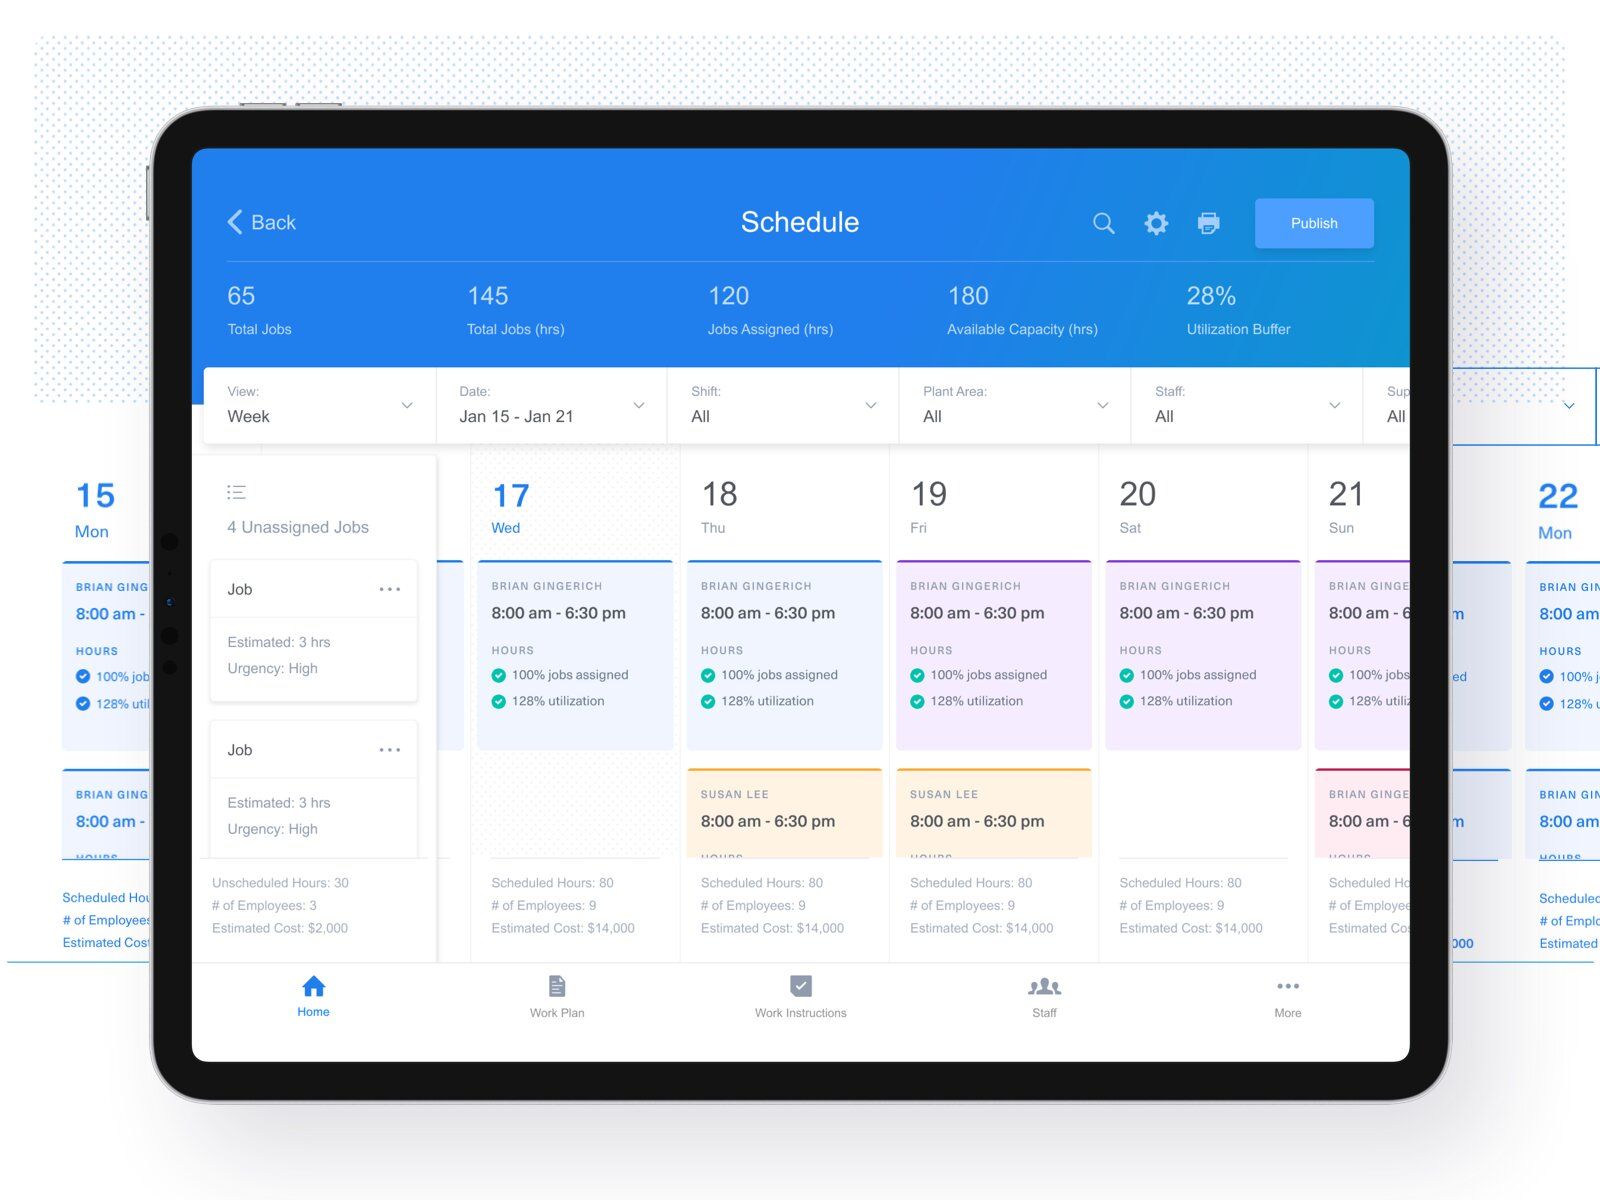 To create your own CRM for your company’s teams, you might add an in-built calendar (*image by [Amit Jakhu](https://dribbble.com/amitjakhu){ rel="nofollow" target="_blank" .default-md}*)